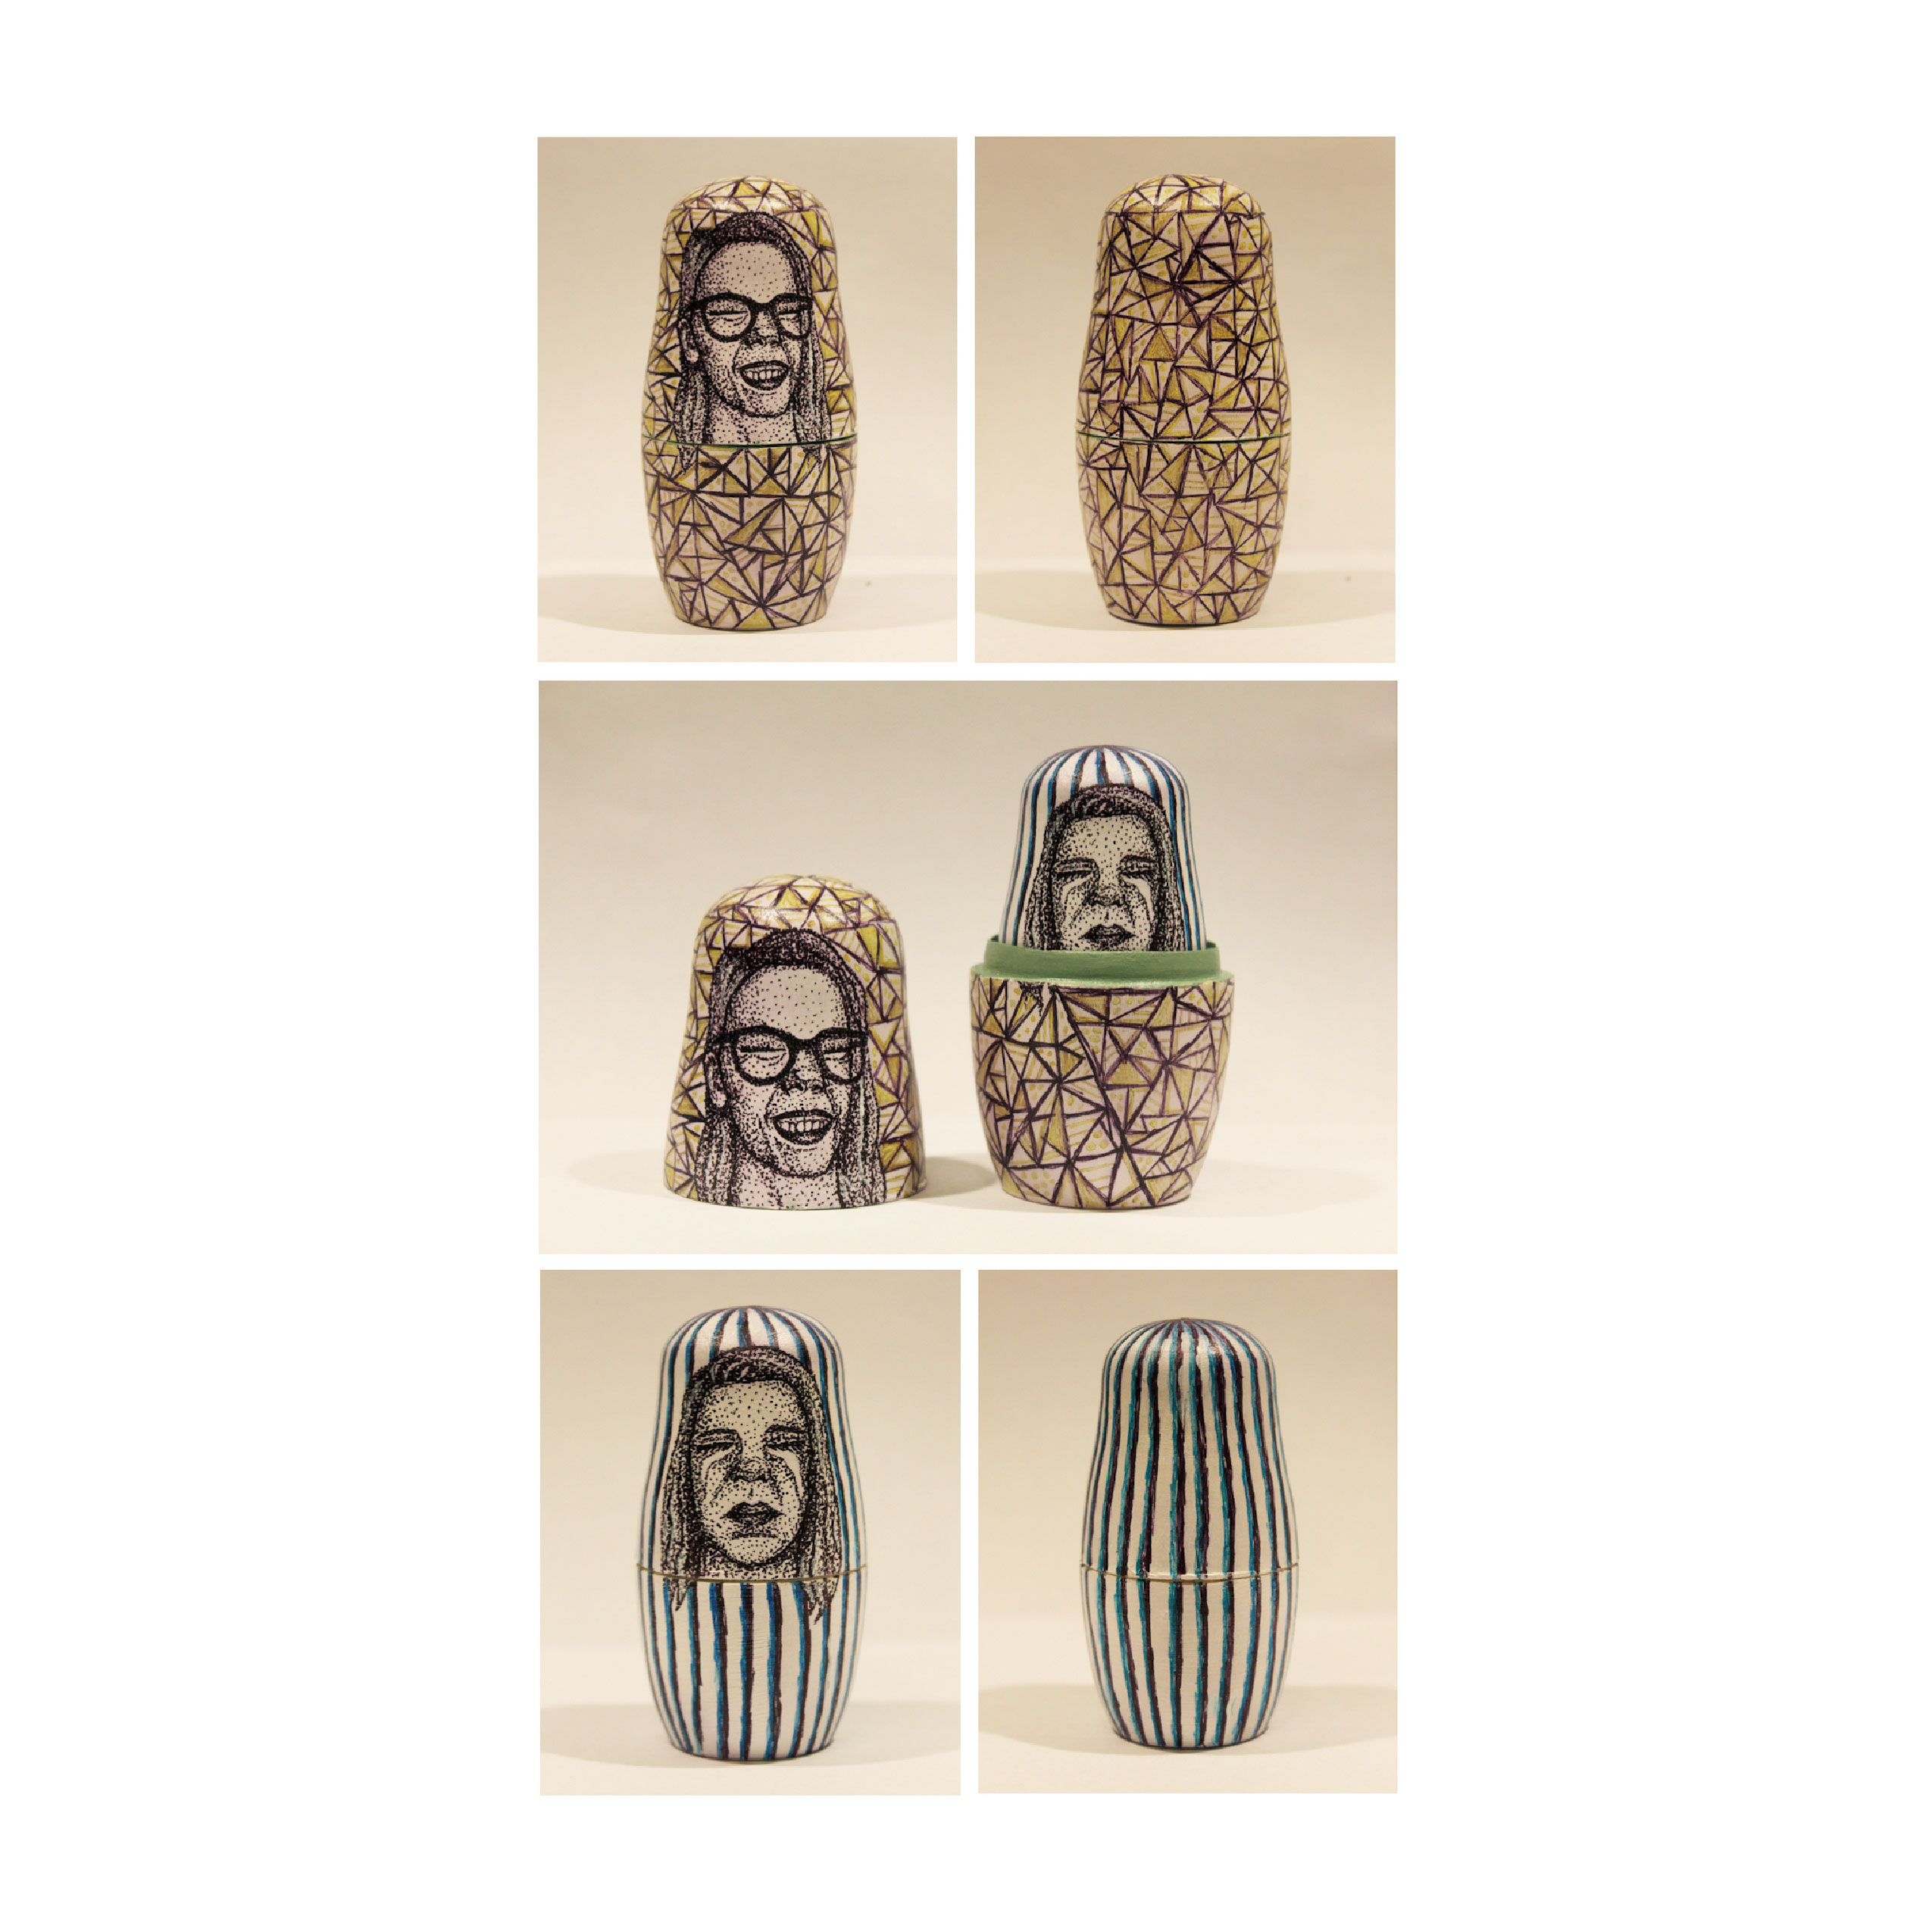 russian nesting dolls painted with the artists face depicting happiness on the outside and happiness on the inside